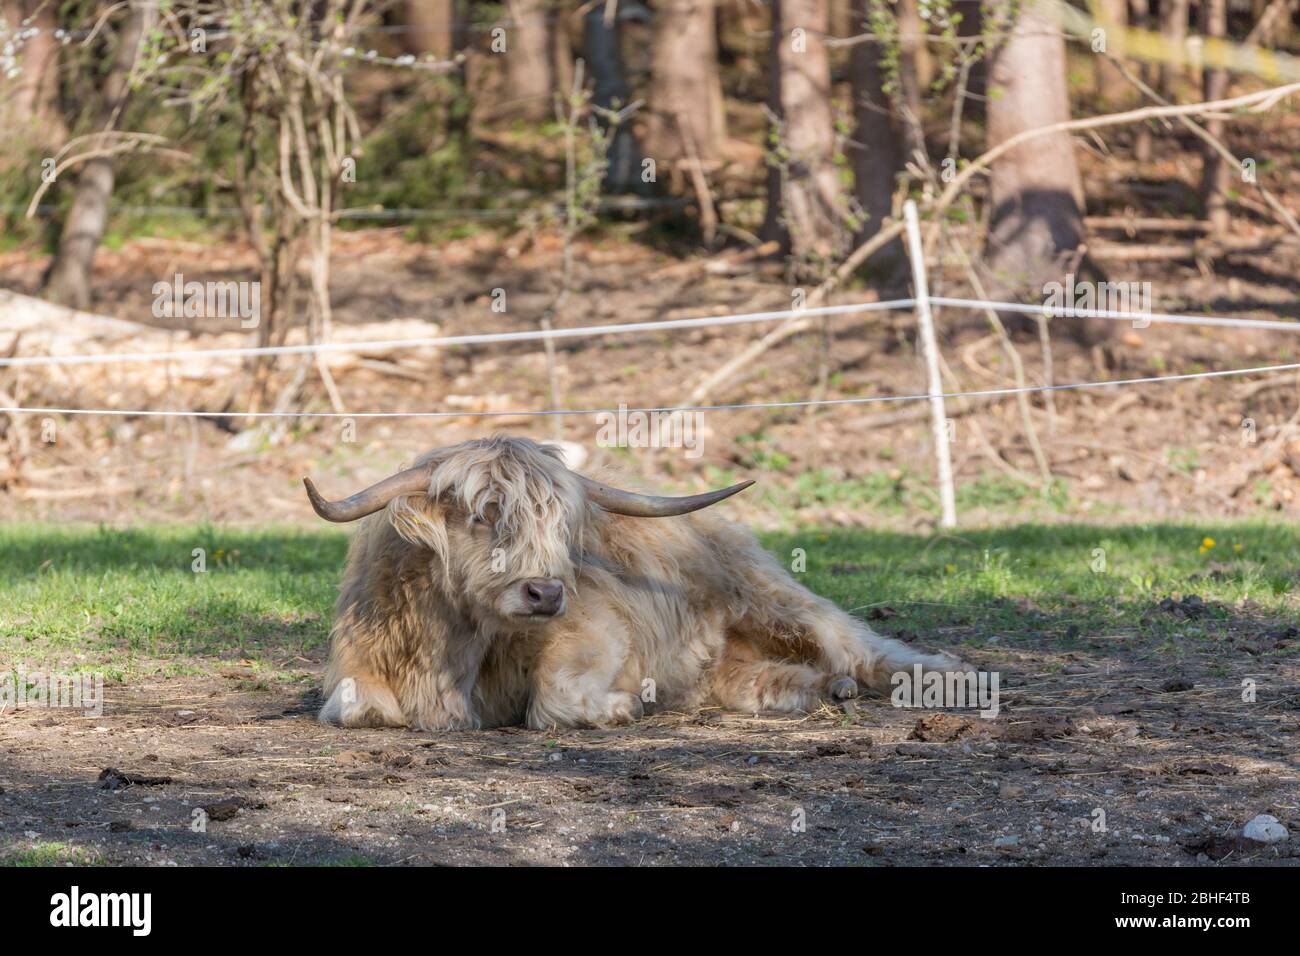 White colored scottish highland cow taking a rest beneath the shadow of a tree. With characteristic horns and fur. Livestock farming. Stock Photo